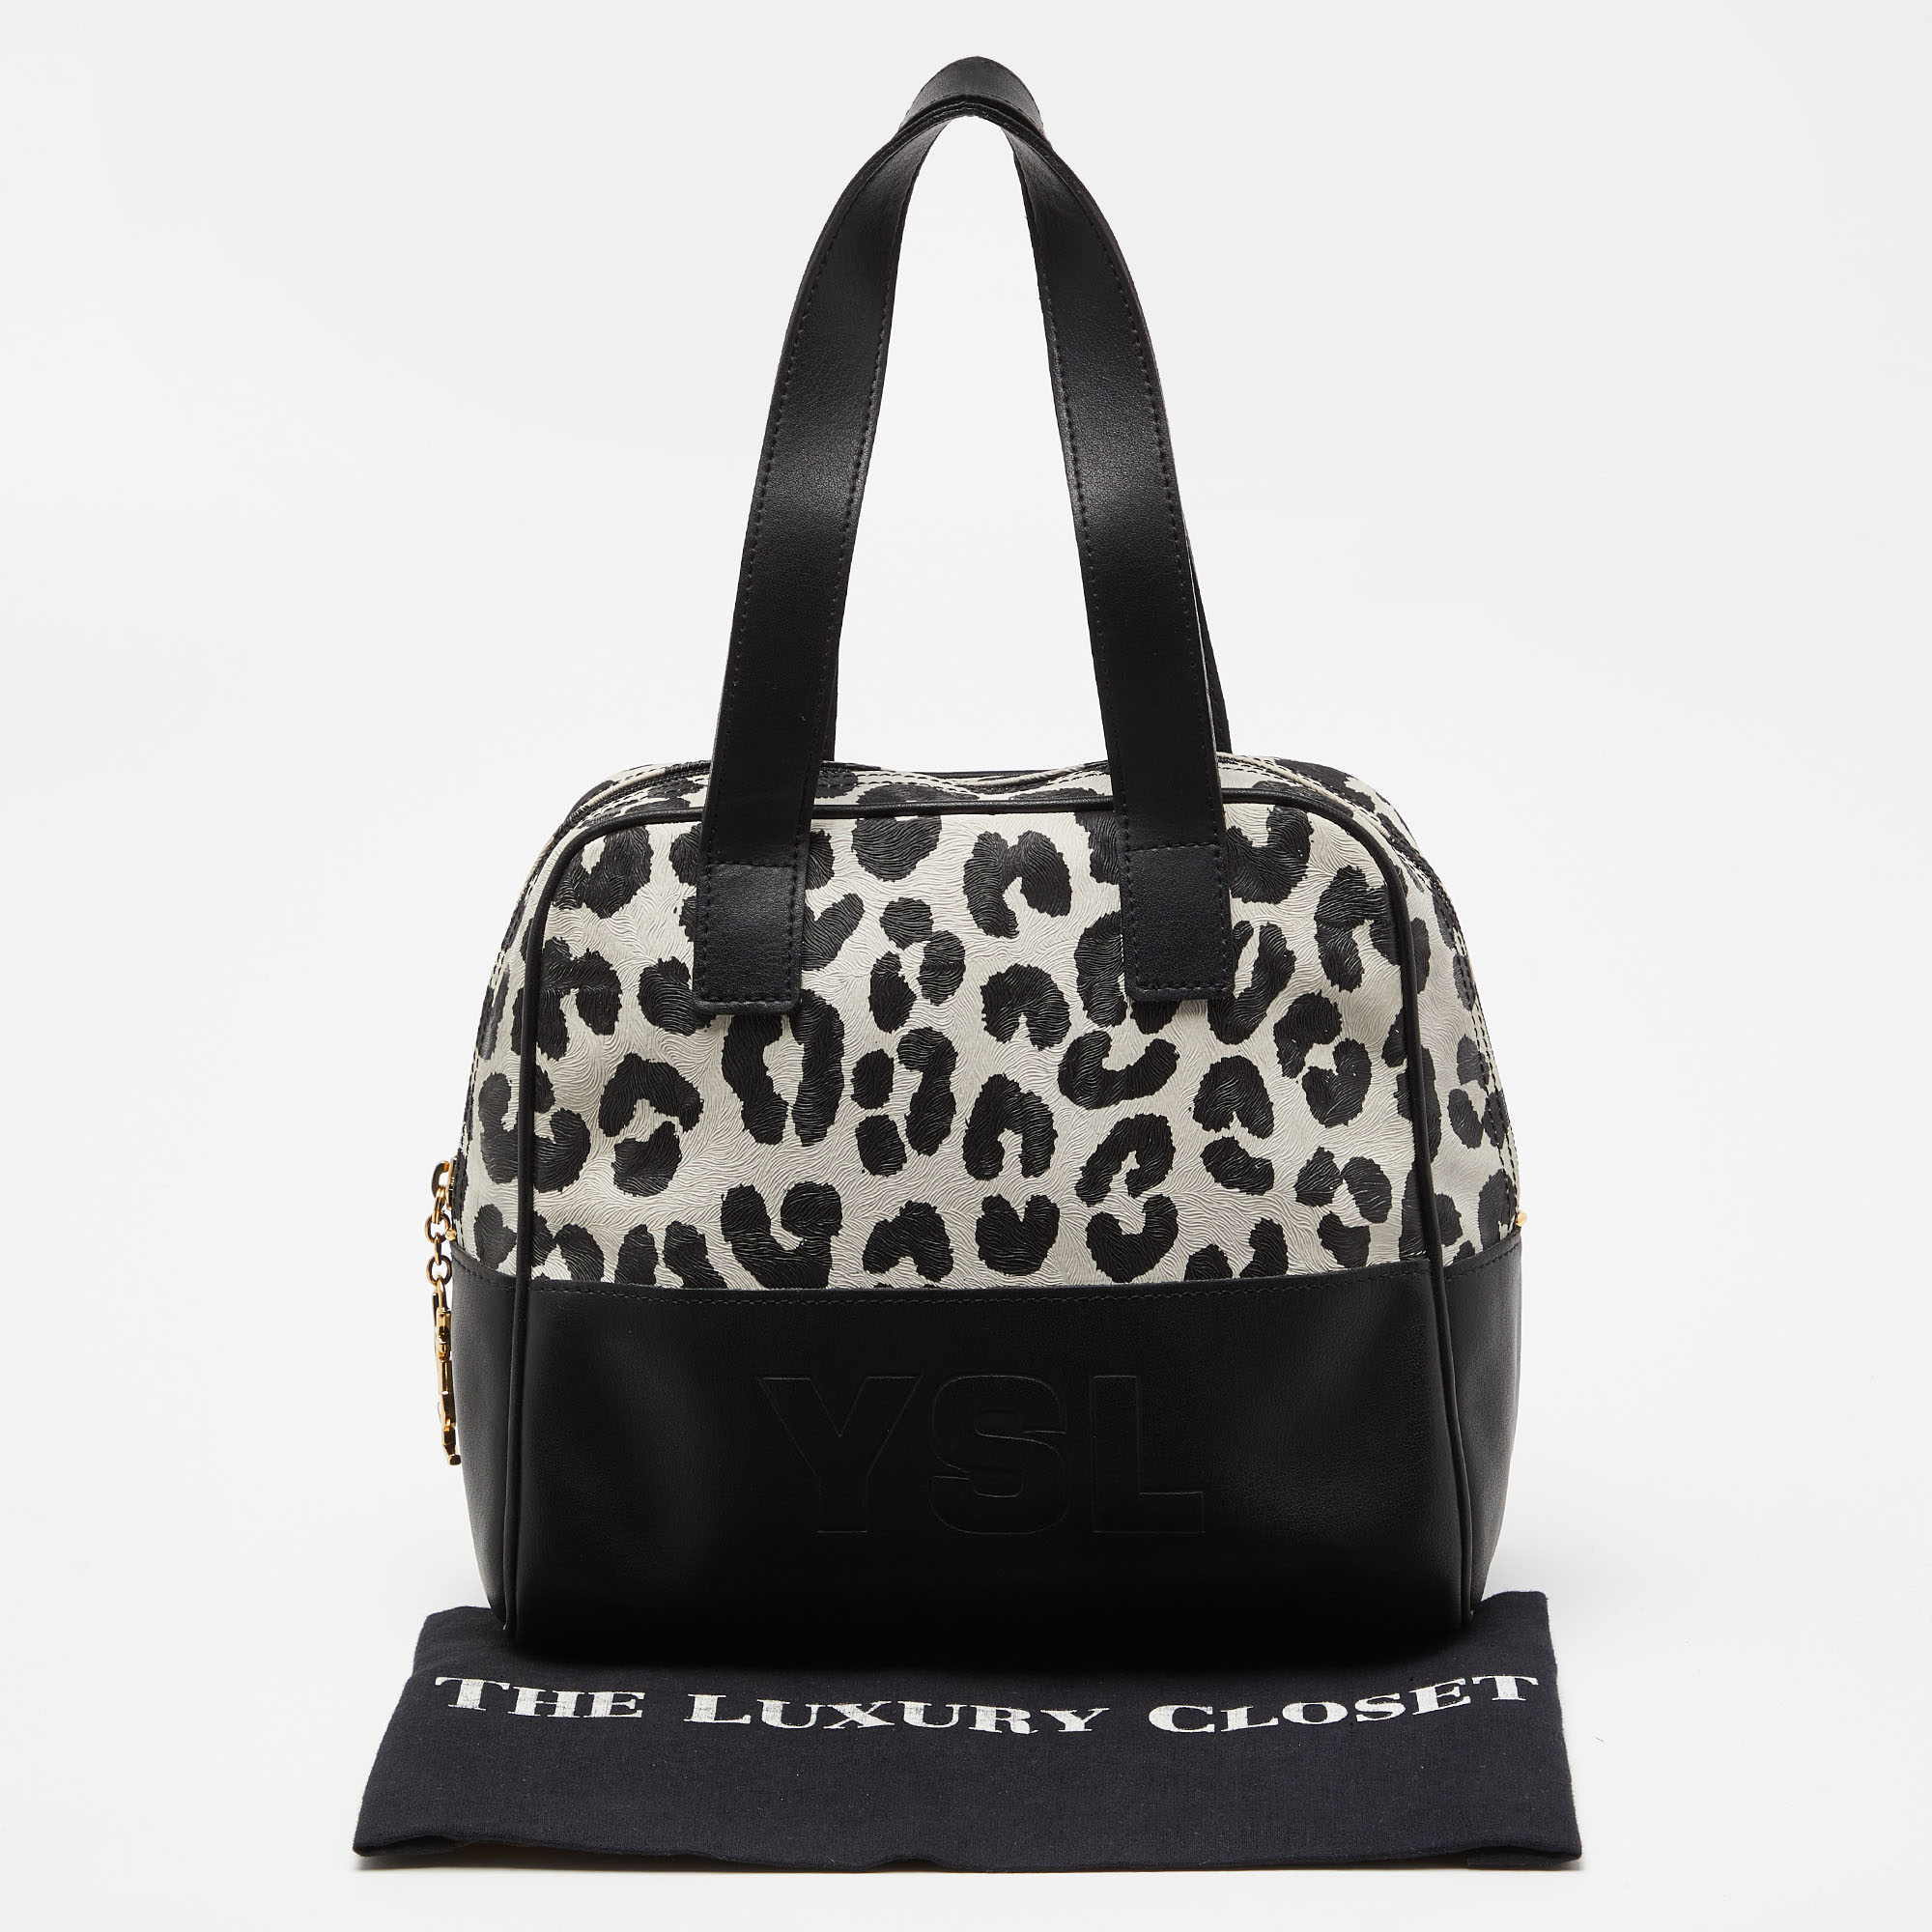 Yves Saint Laurent Black/White Leopard Print Coated Canvas And Leather Satchel